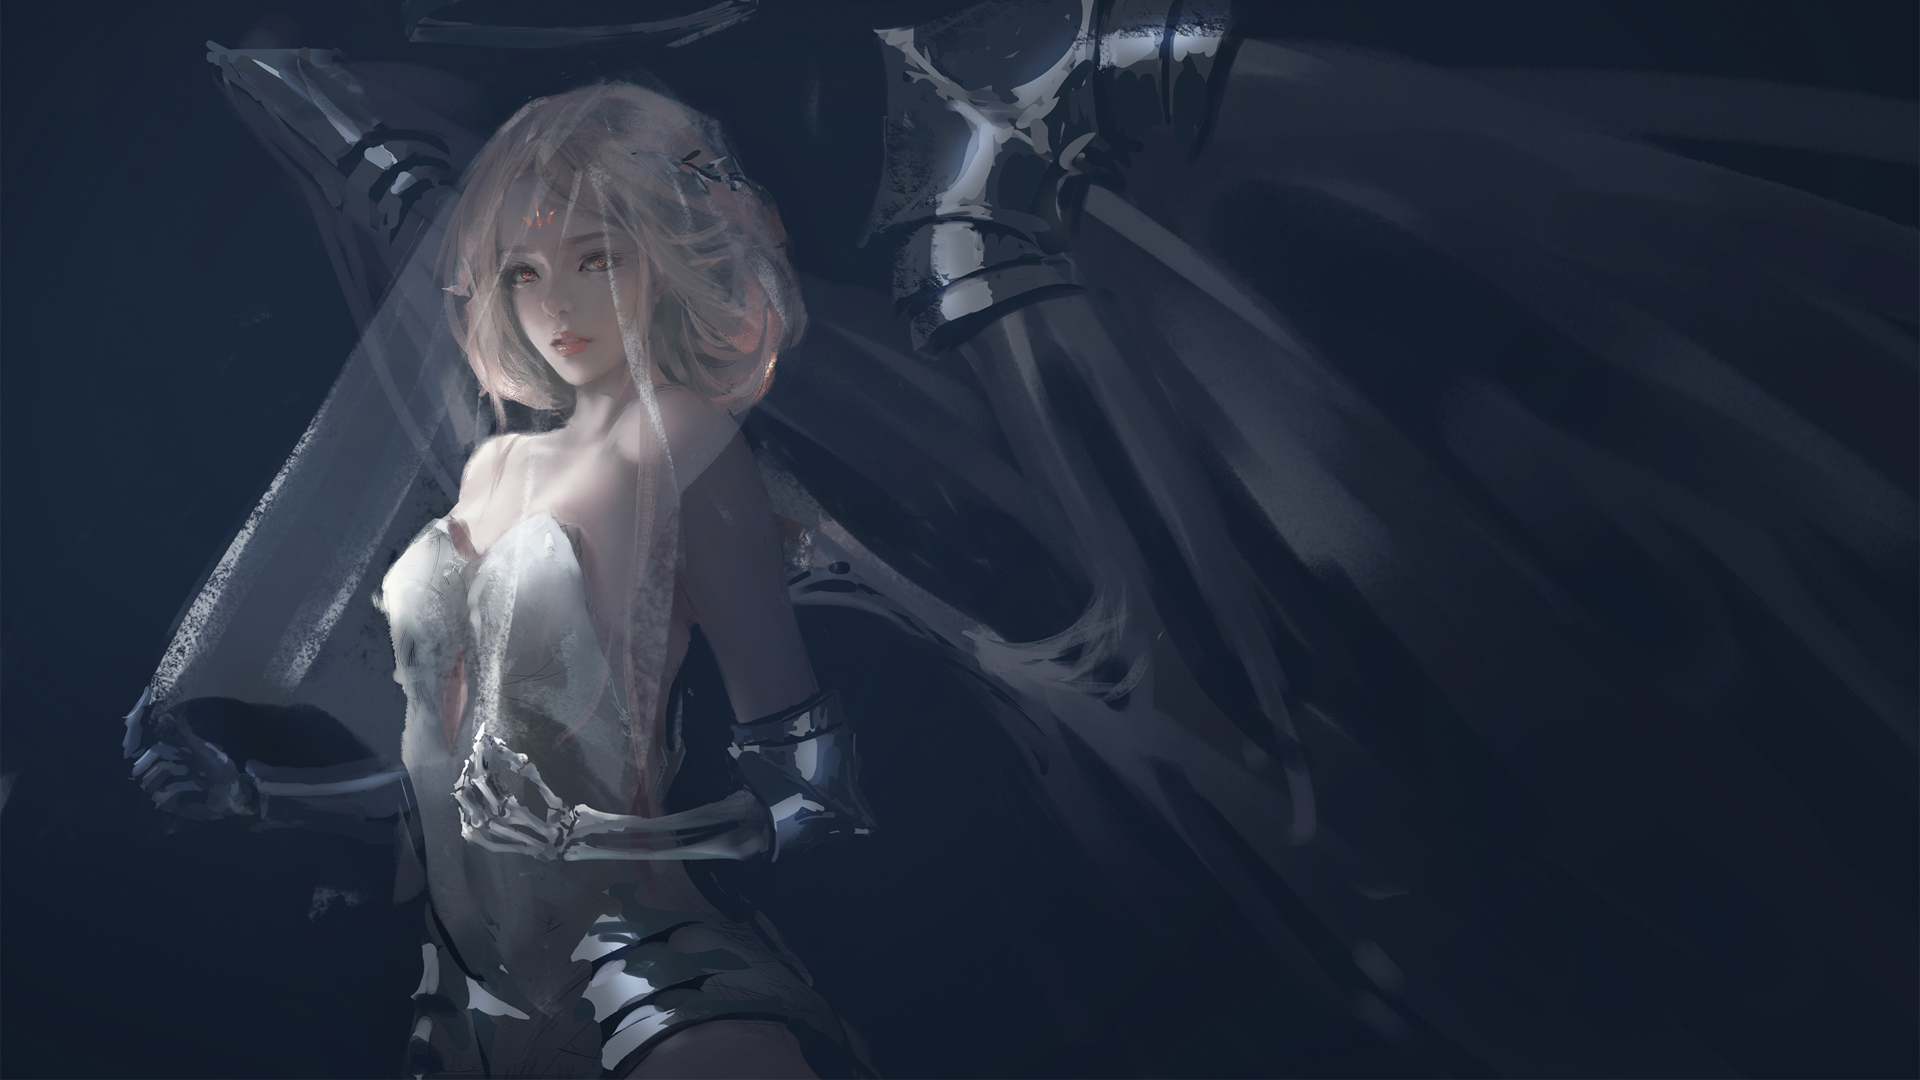 Girl Warrior Anime Painting High Contrast WLOP 1920x1080